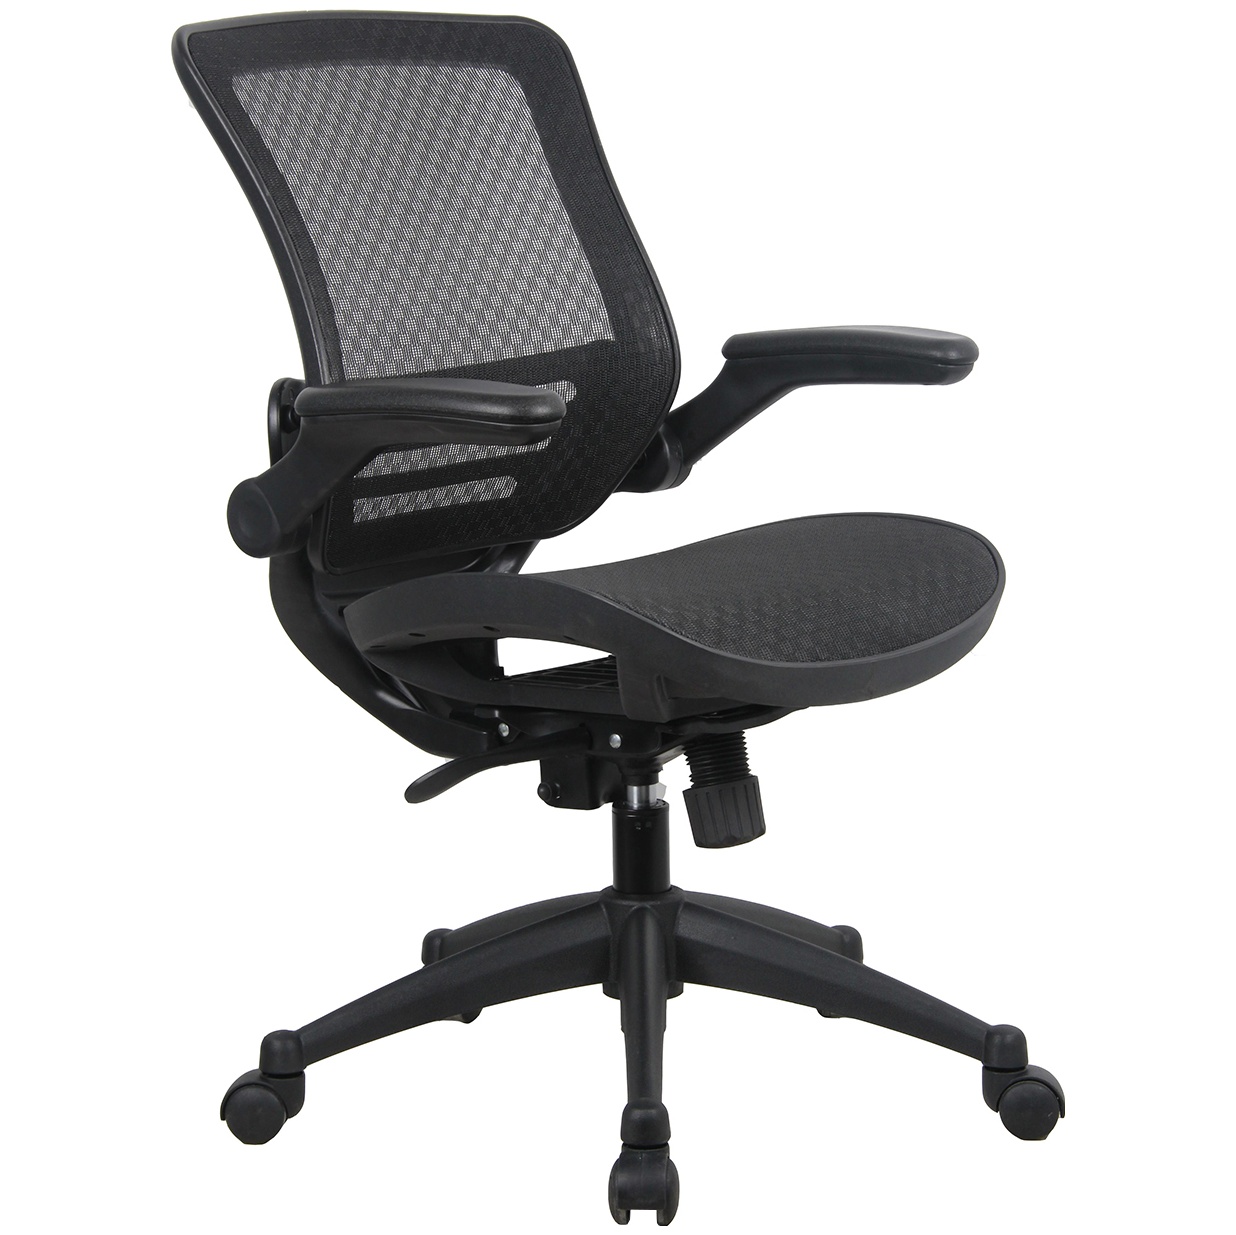 All Mesh Synchro Office Chair Free Uk Delivery